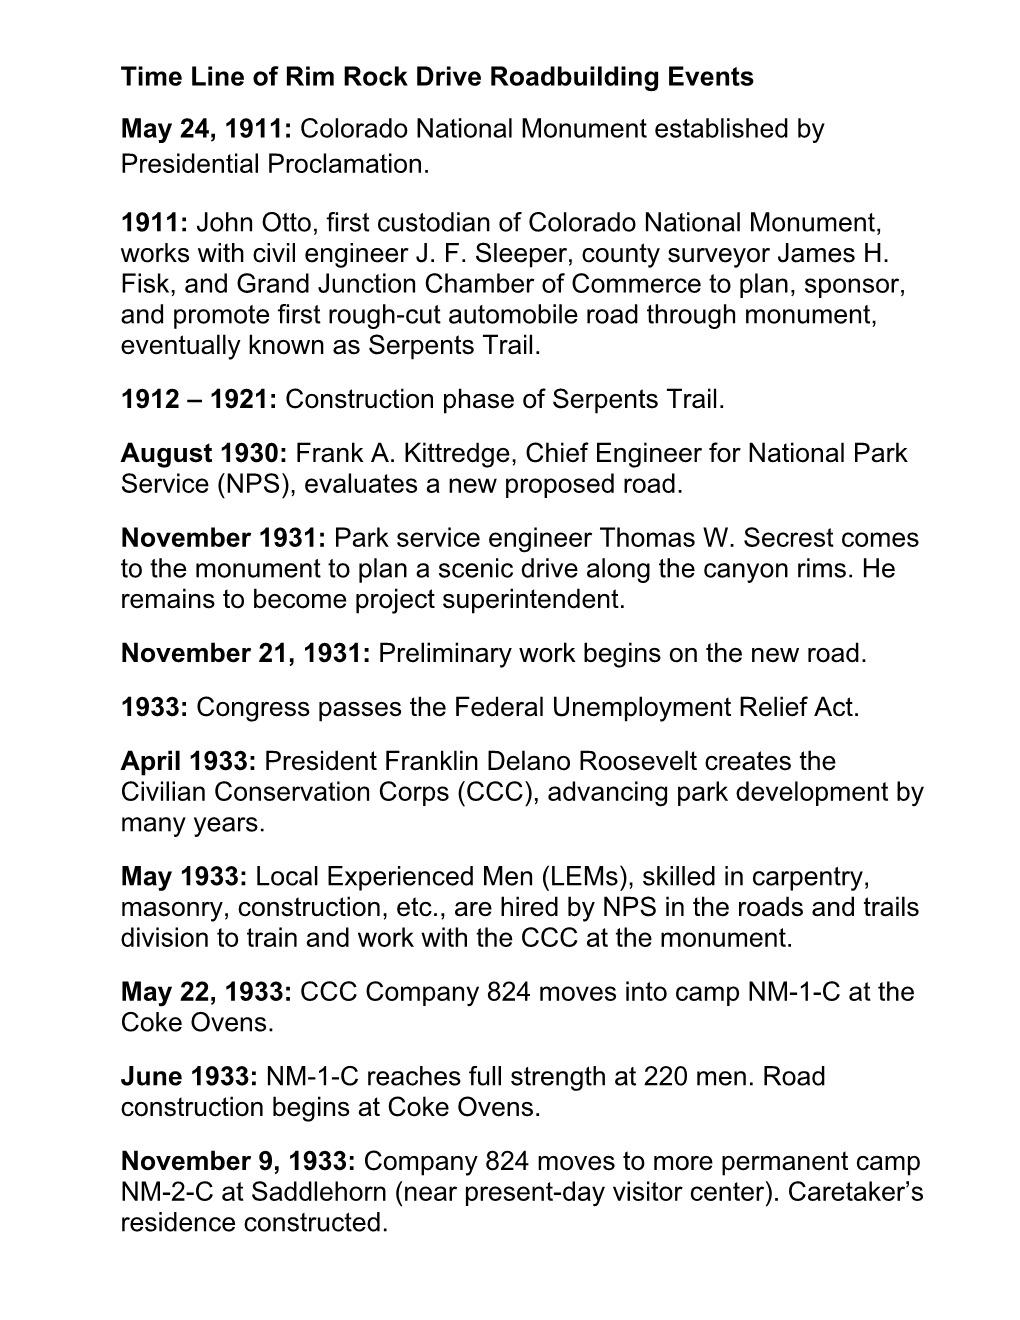 Time Line of Rim Rock Drive Roadbuilding Events May 24, 1911: Colorado National Monument Established by Presidential Proclamation